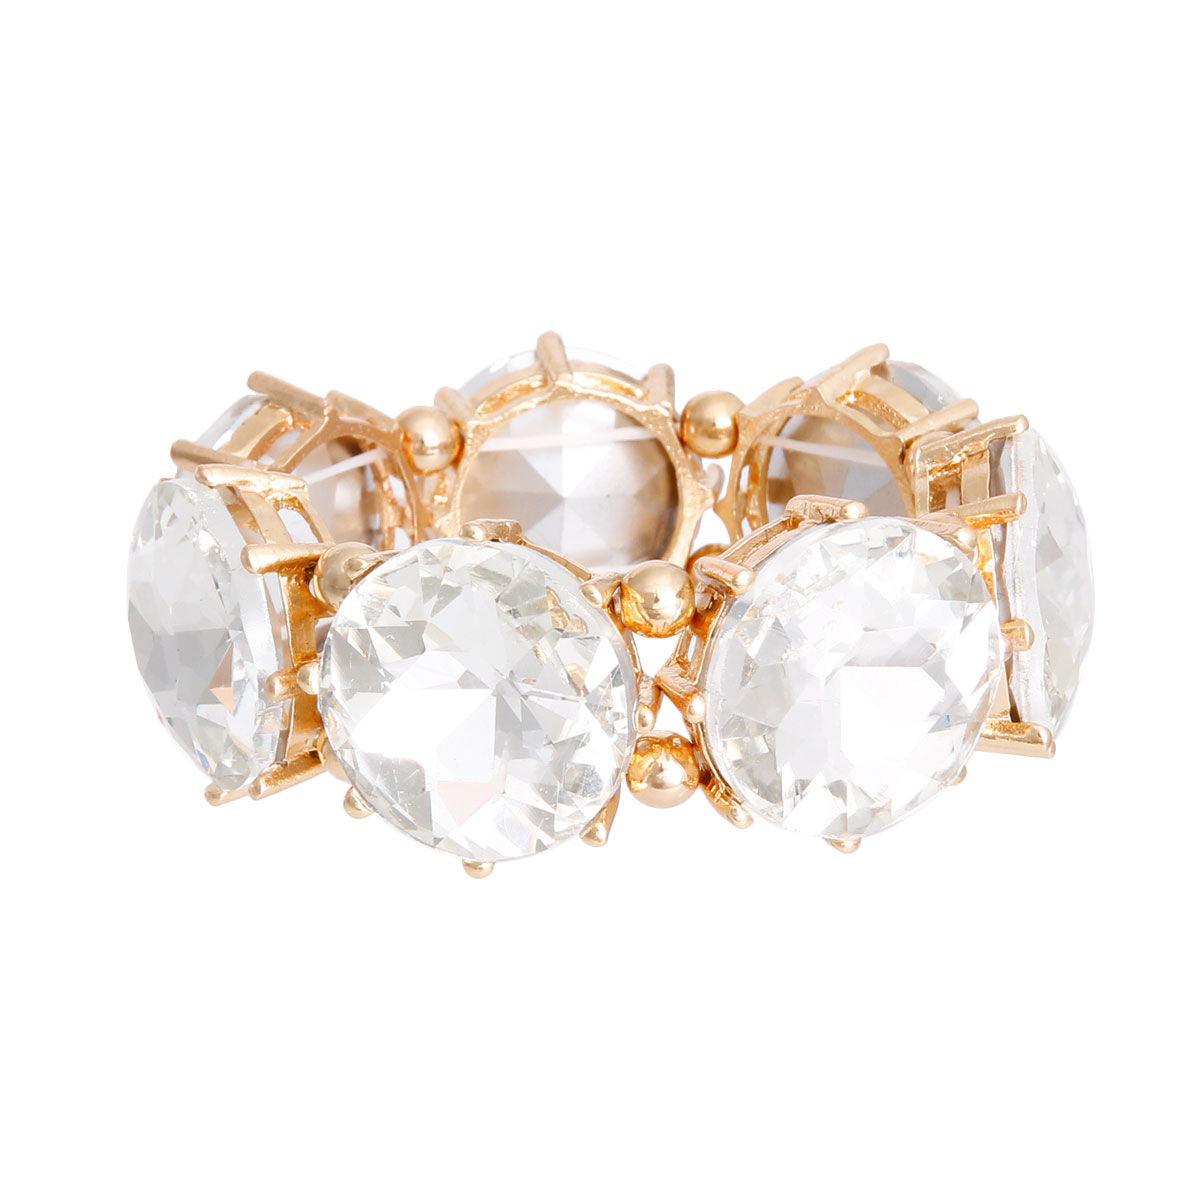 Clearly Chic Statement Bracelet